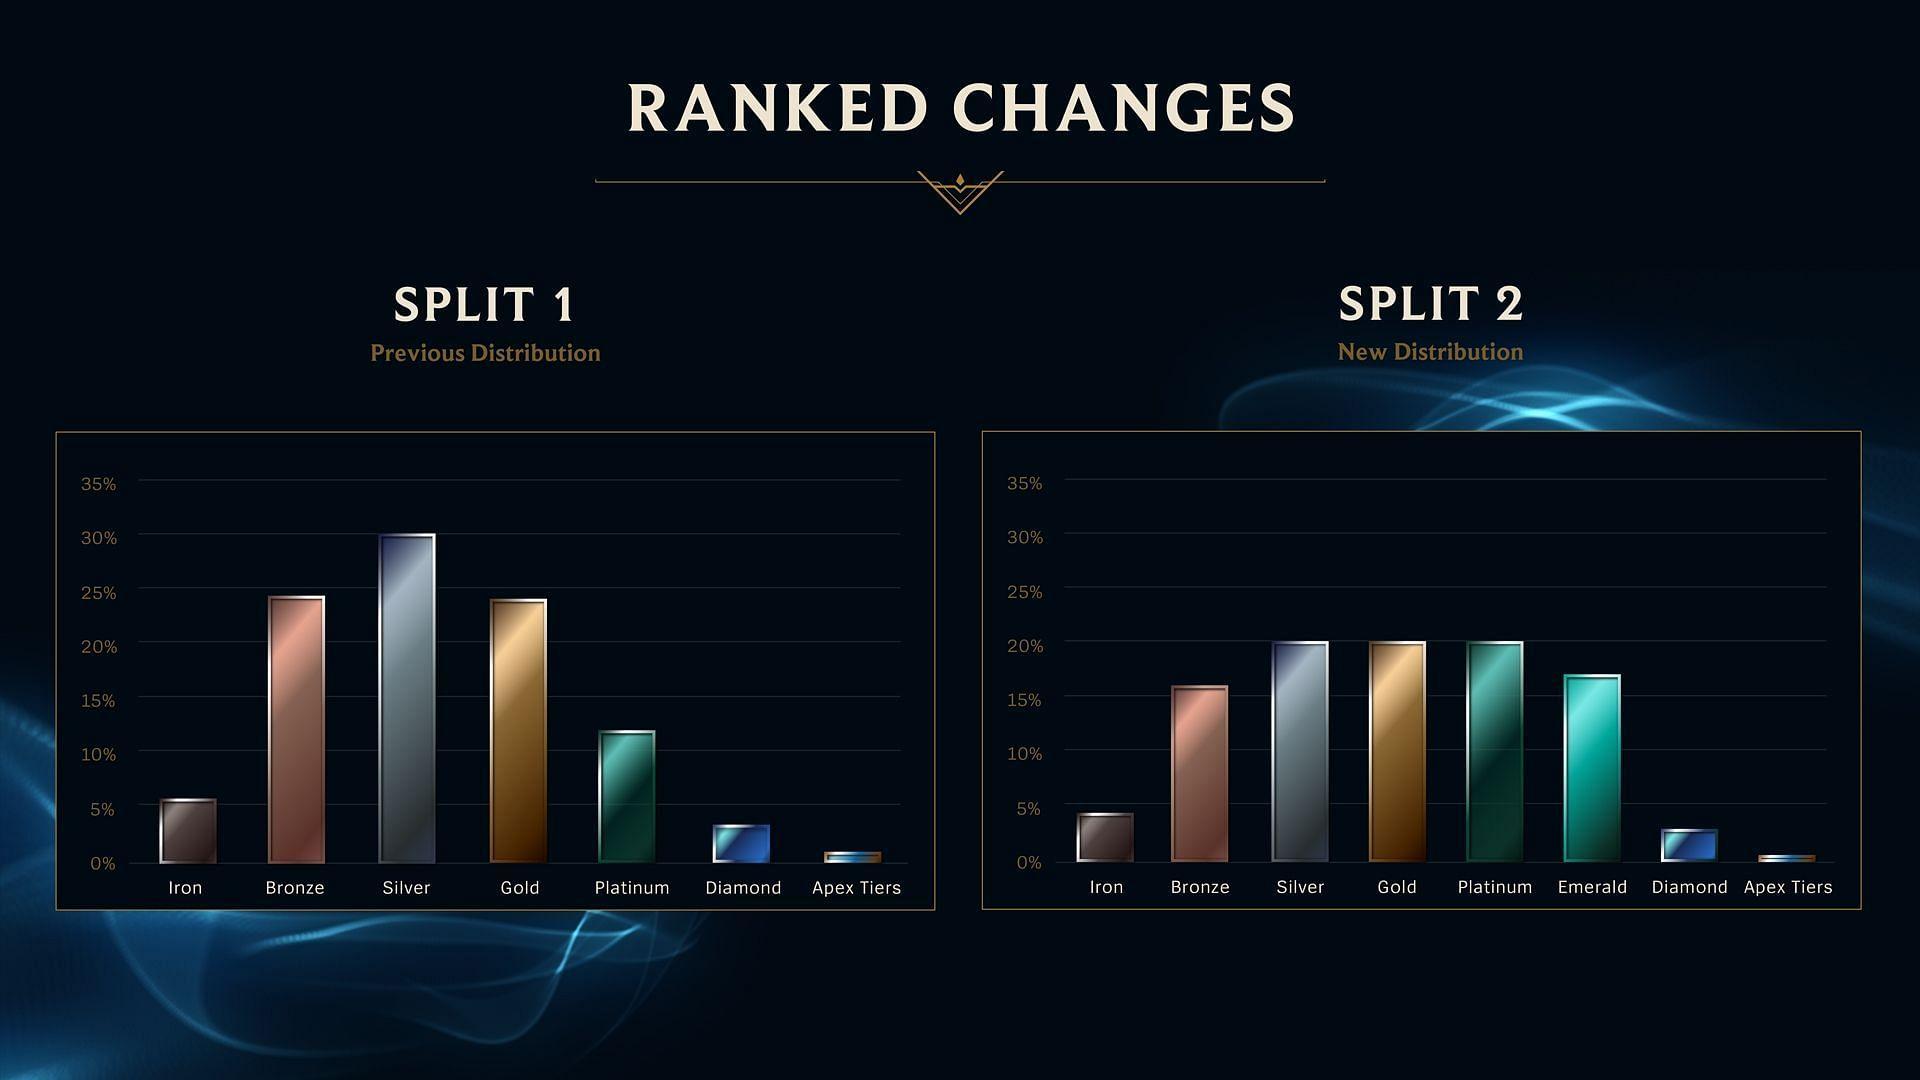 Emerald: A new rank coming to LoL (Image via Riot Games)